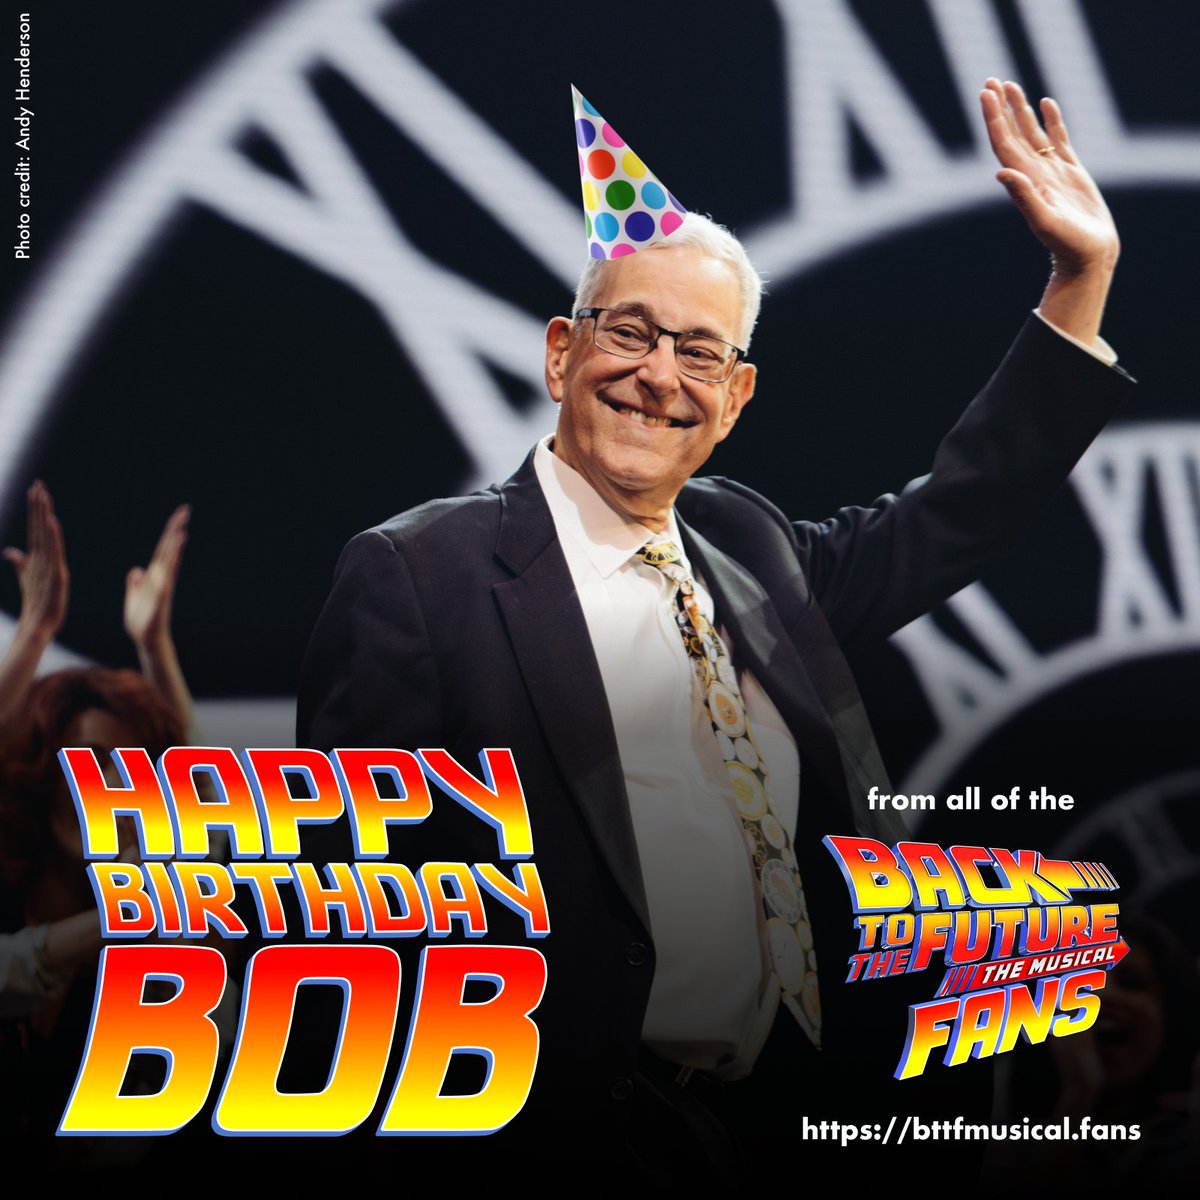 Sending the biggest and heaviest birthday wishes to #BobGale, the original DREAMER who never stopped believing 💙

📸 @andyhendersons

#bttfmusical #backtothefuturemusical #backtothefuturethemusical #bttfbway #bttfbroadway #backtothefuturebroadway #bttftour #bttf #backtothefuture